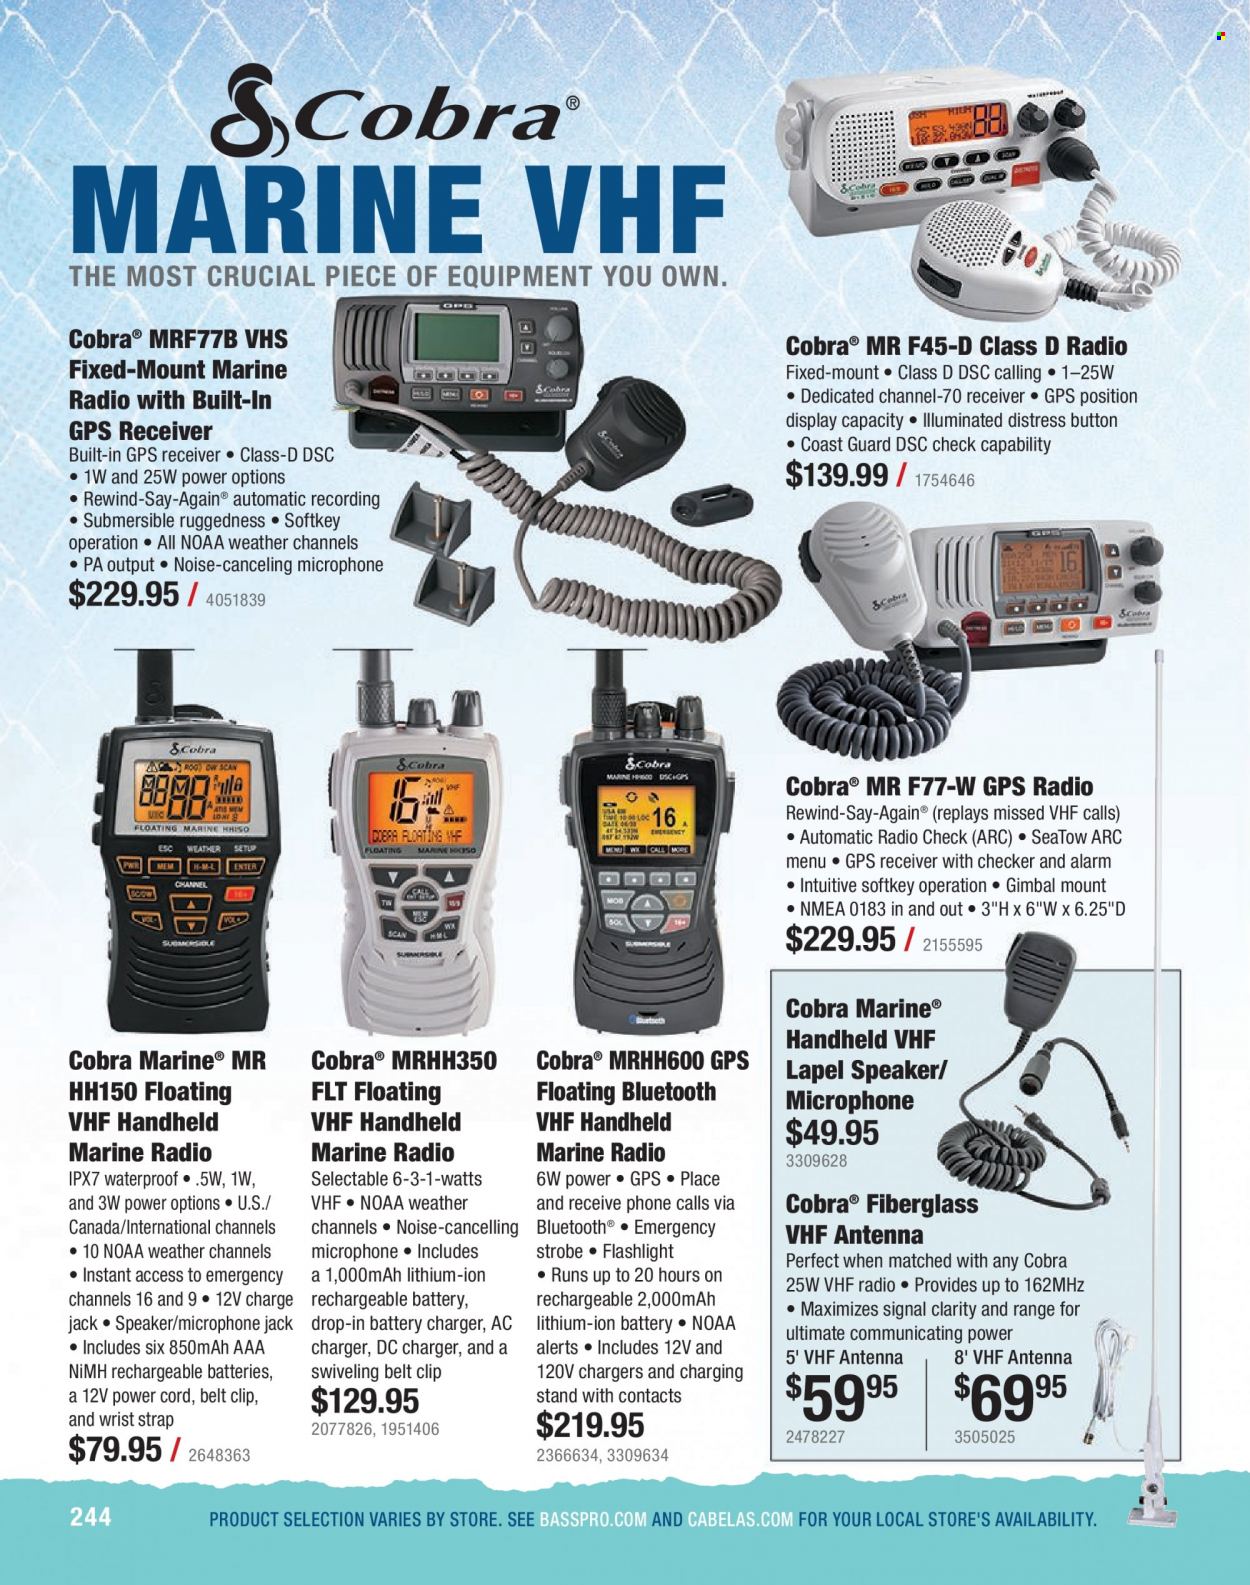 Bass Pro Shops Flyer - Sales products - radio, speaker, microphone, antenna, wrist strap, strap. Page 244.